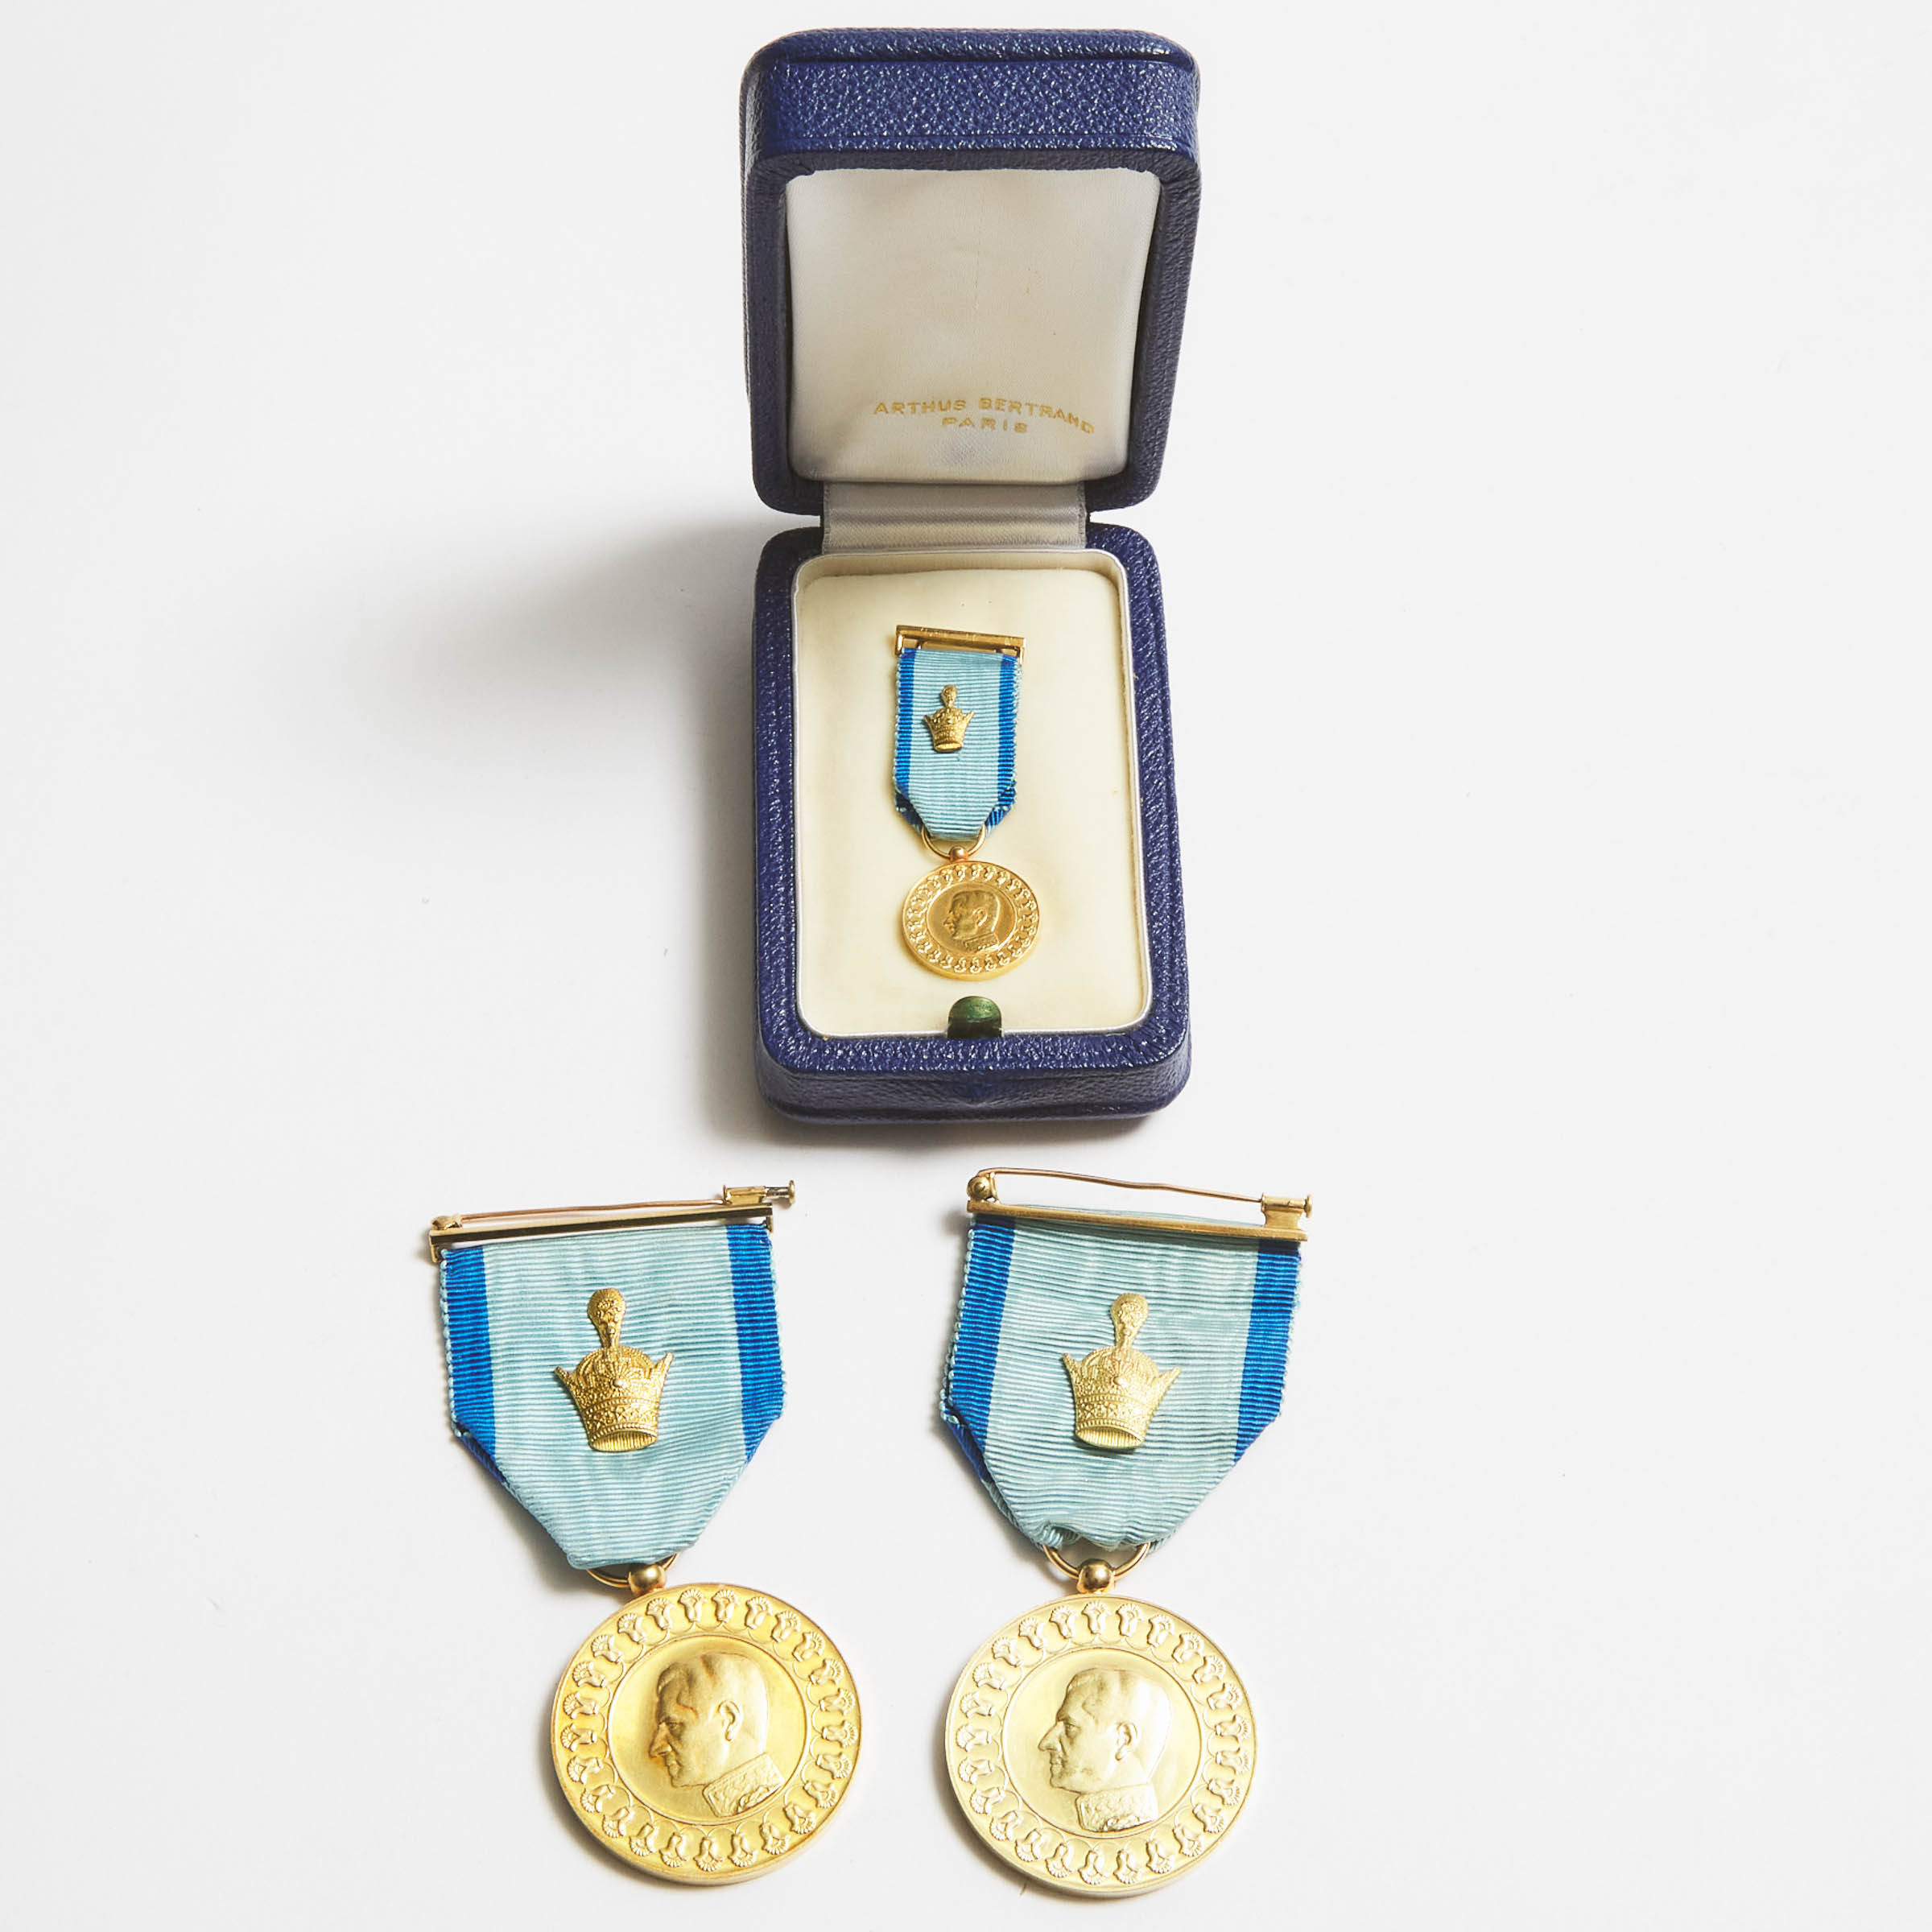 Three Gold Medals Commemorating